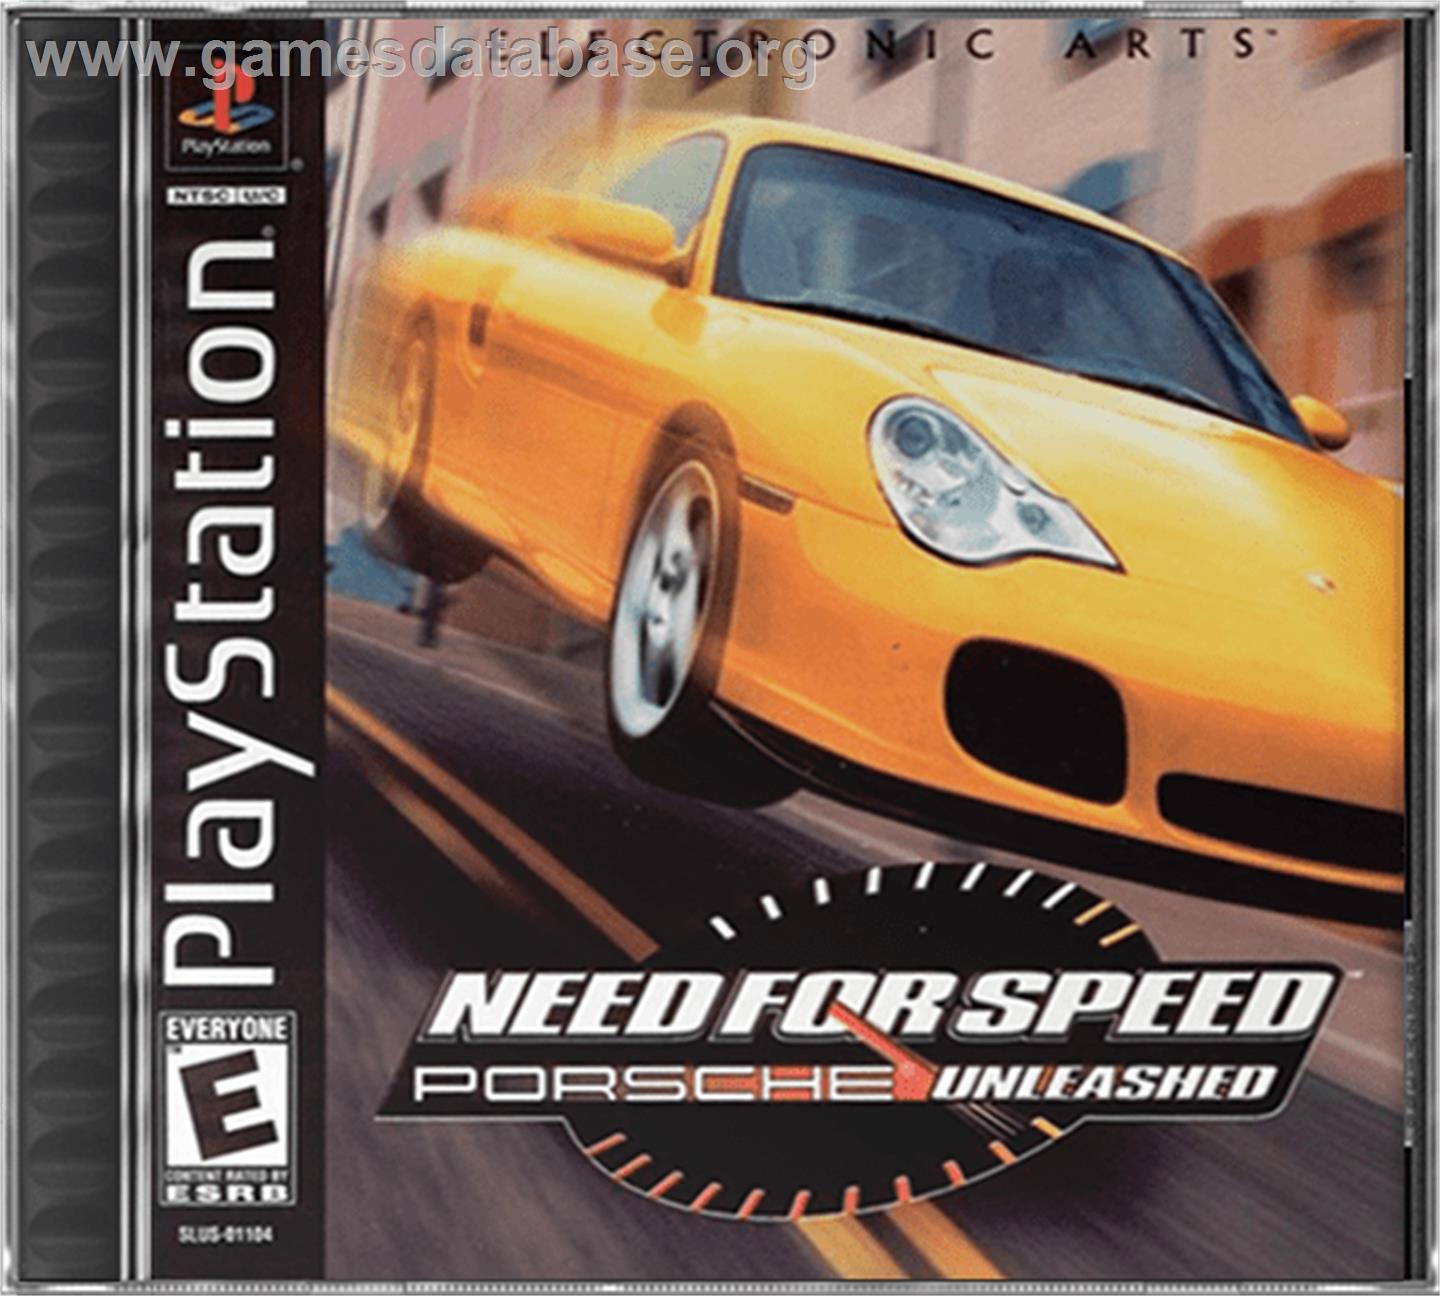 Need for Speed: Porsche Unleashed - Sony Playstation - Artwork - Box